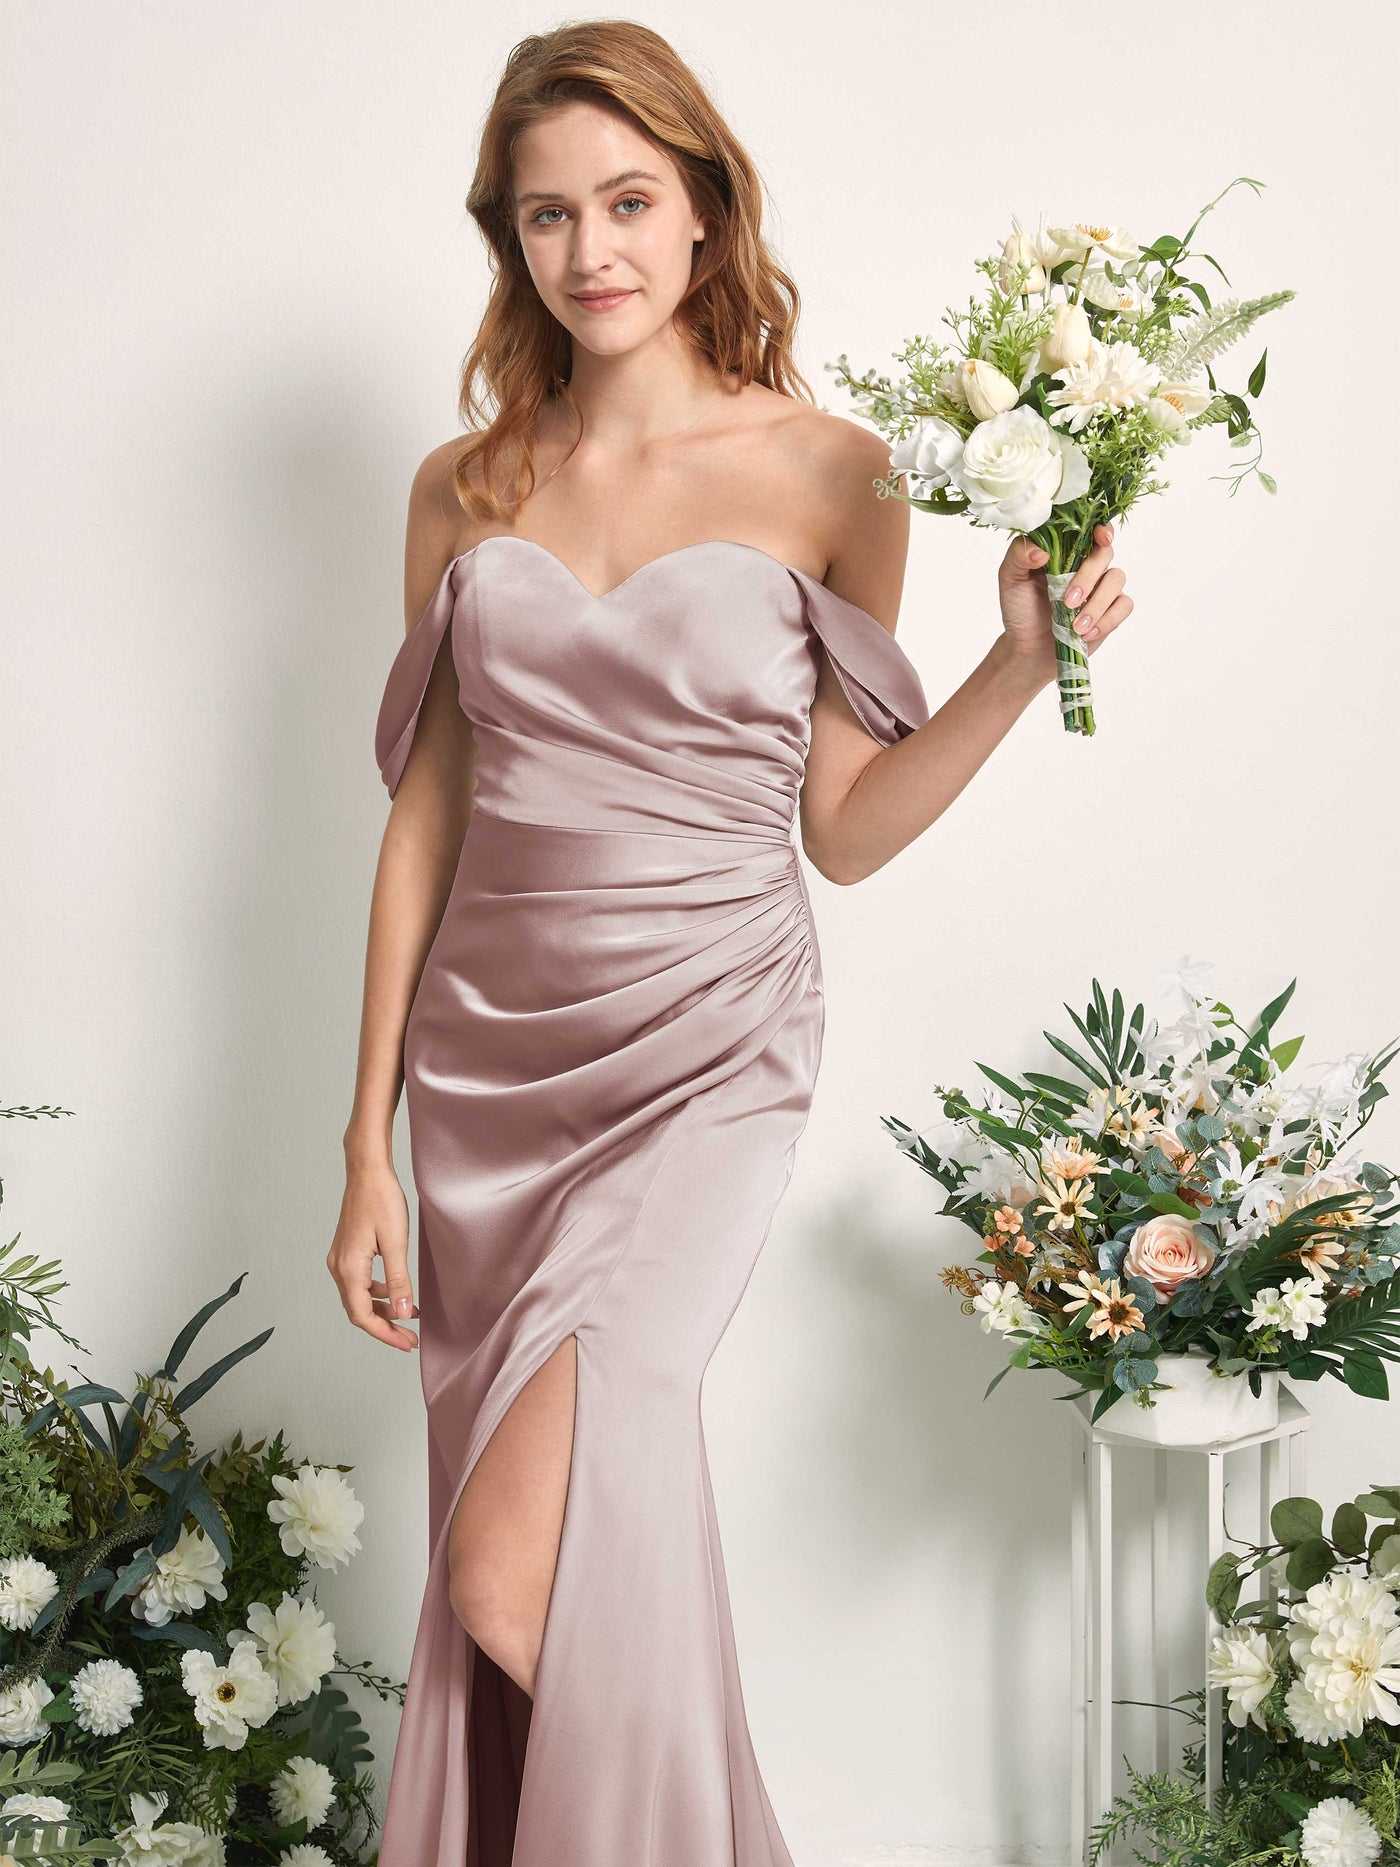 Dusty Rose Bridesmaid Dresses Bridesmaid Dress A-line Satin Off Shoulder Full Length Sleeveless Wedding Party Dress (80225254)#color_dusty-rose